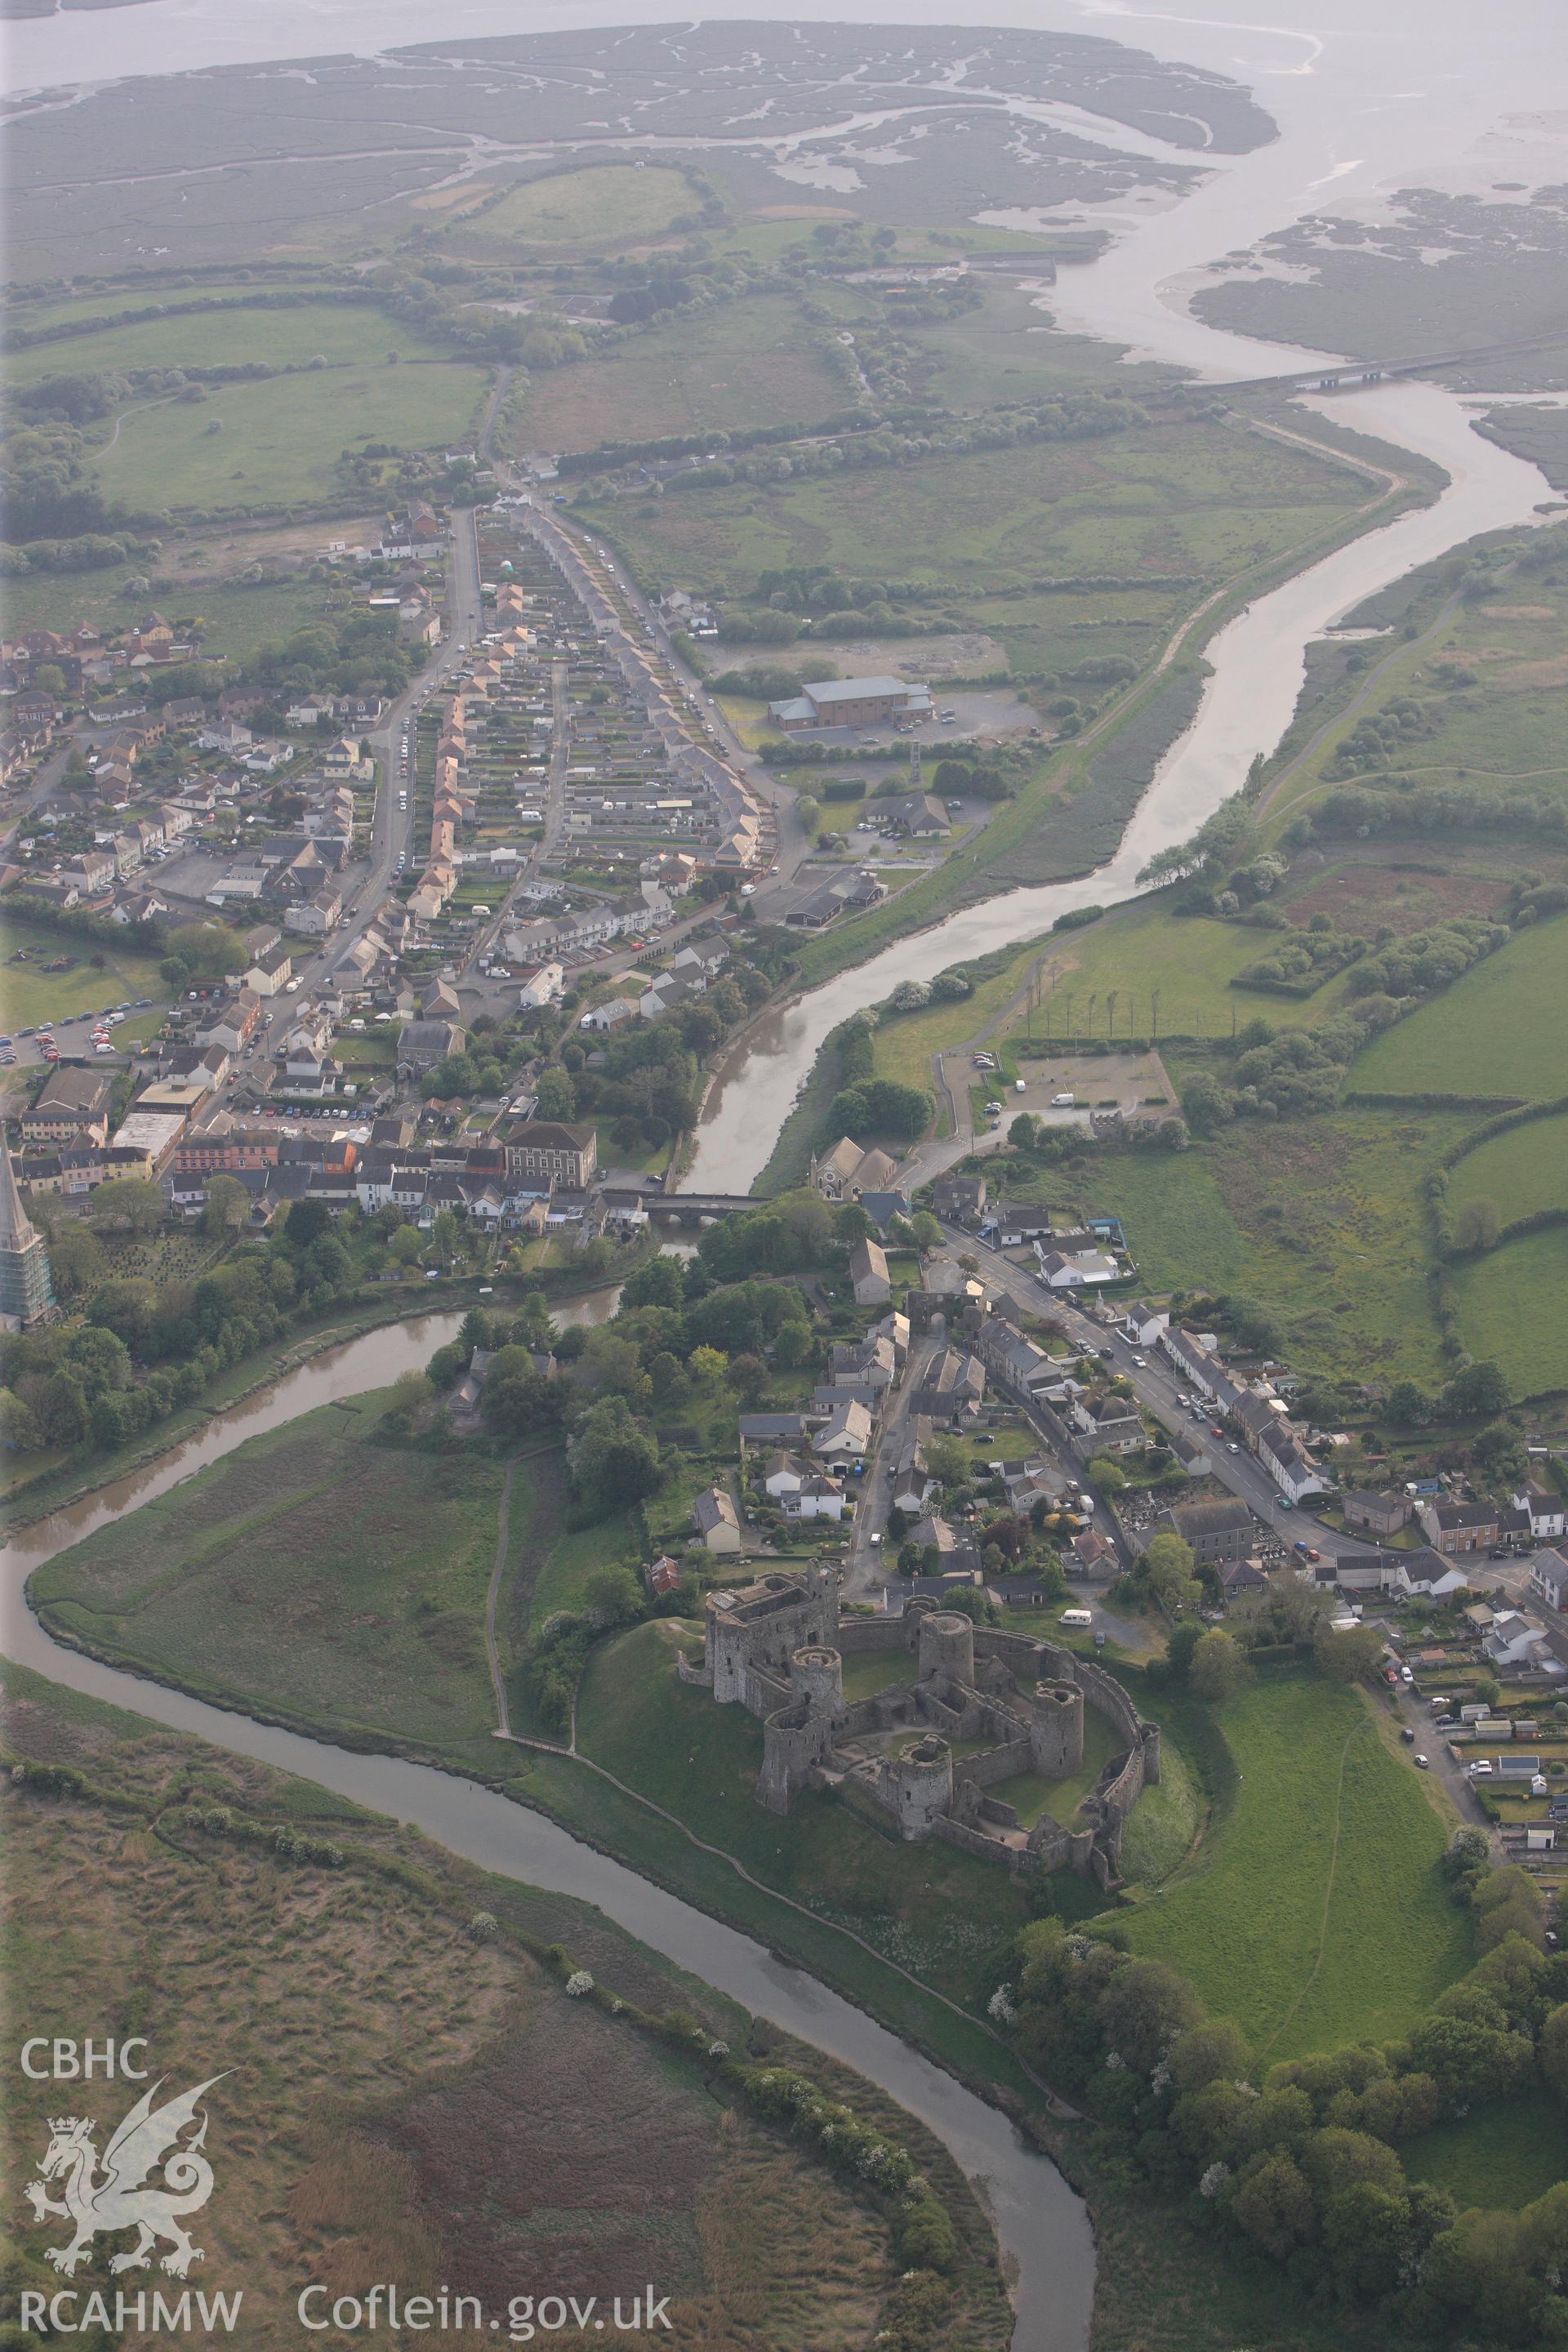 RCAHMW colour oblique photograph of Kidwelly. Taken by Toby Driver and Oliver Davies on 04/05/2011.